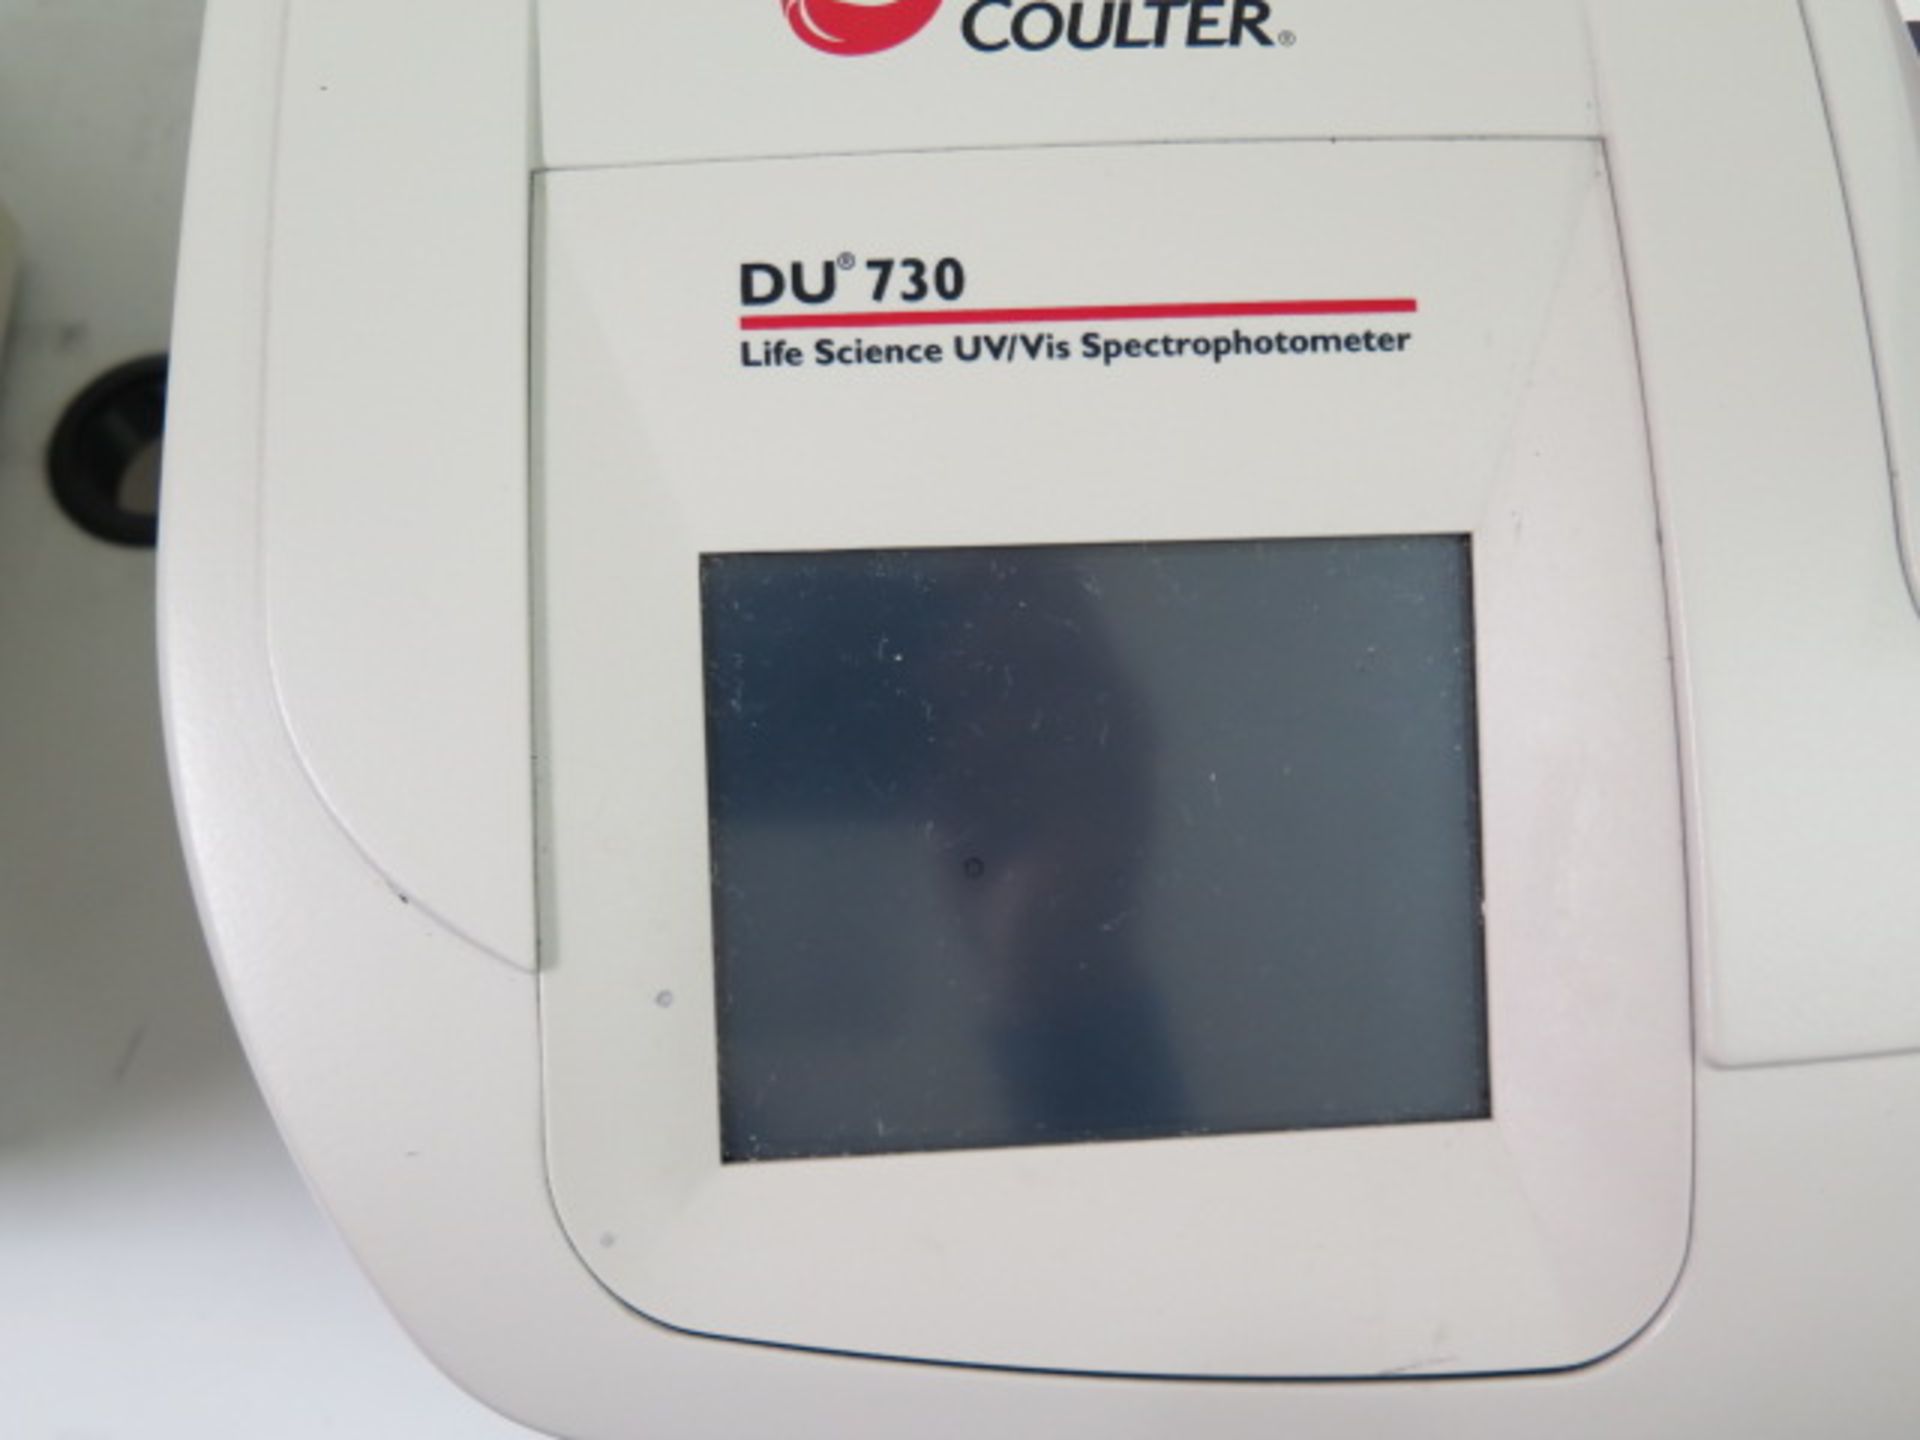 Beckman Coulter A23616 / Life Science DU730 UV/VIS Spectrophotometer s/n 1162836 (SOLD AS-IS - NO WA - Image 4 of 5